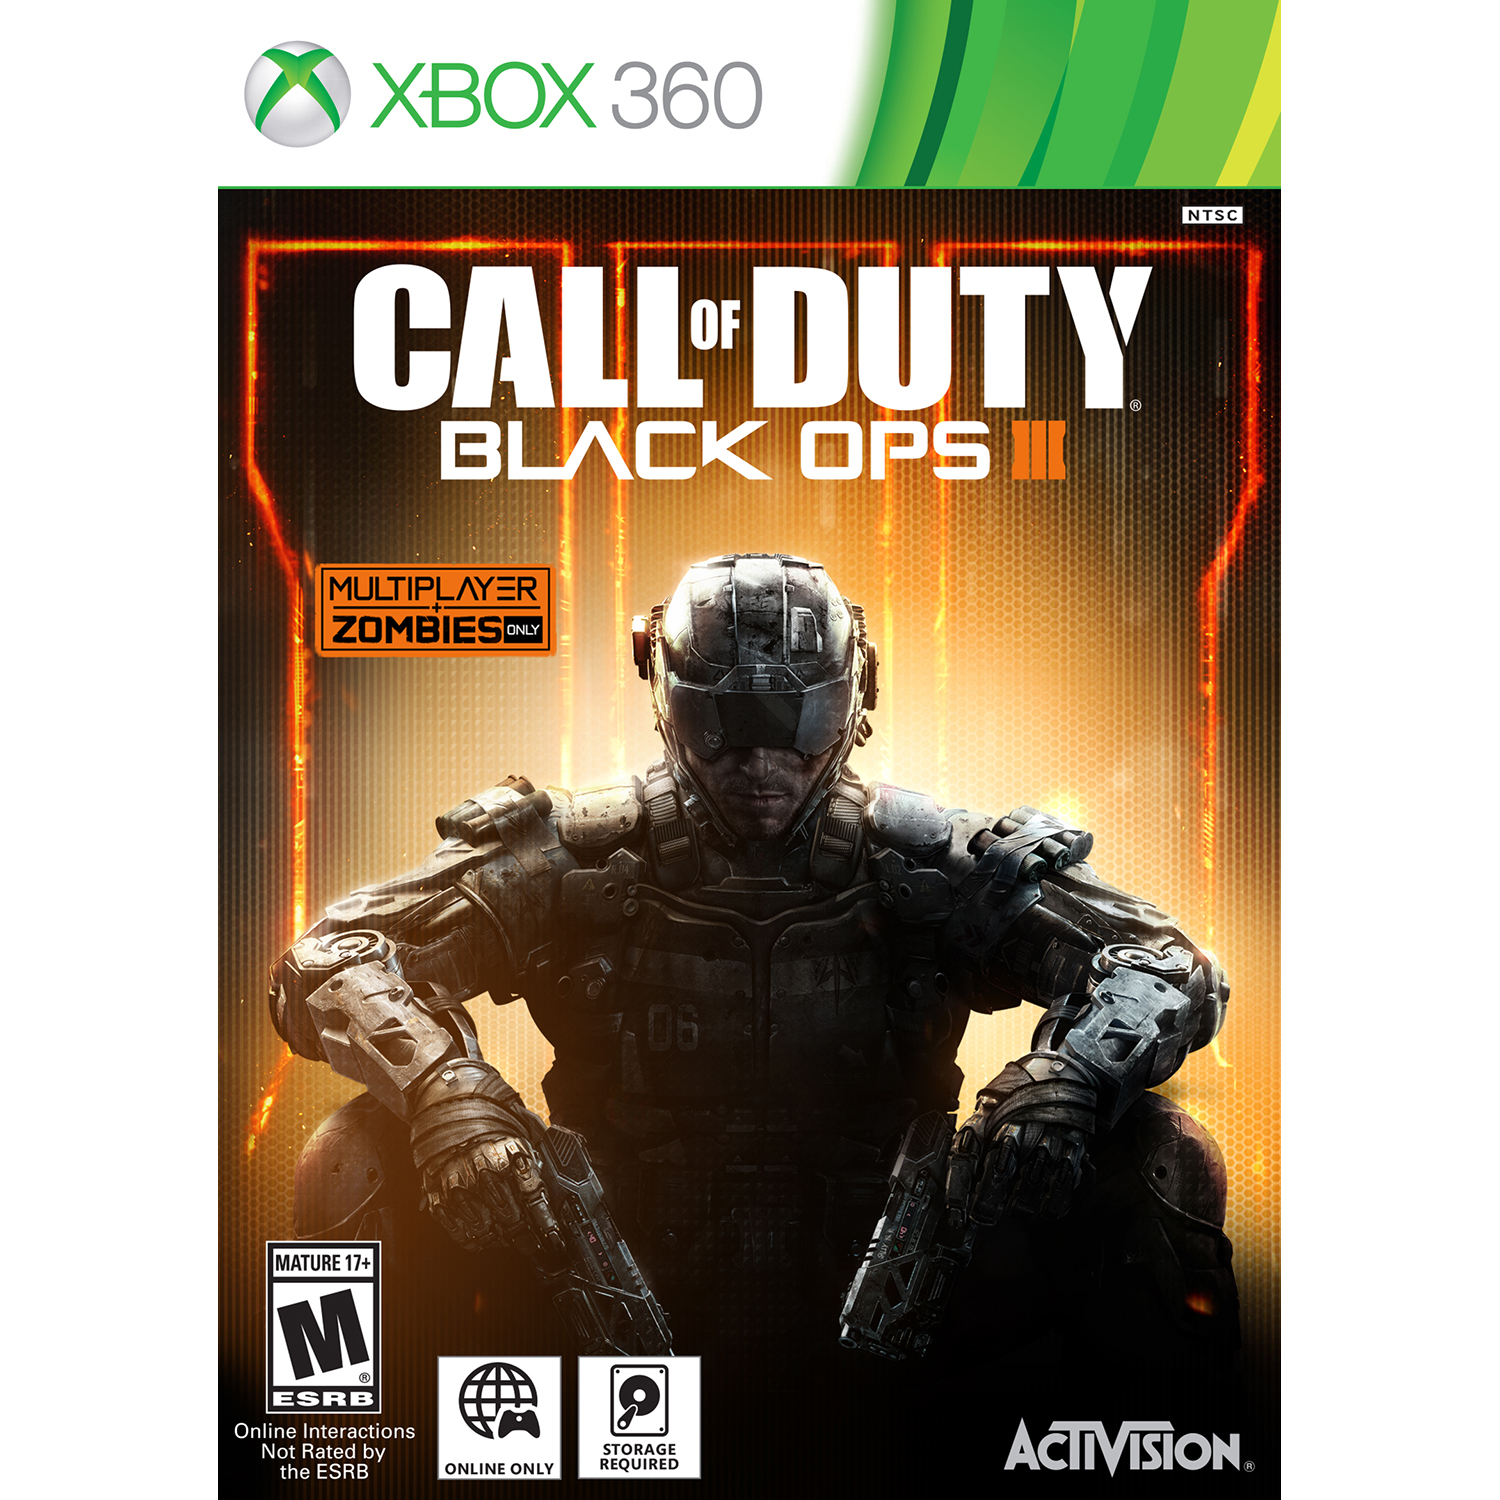 Call of Duty: Black Ops 3, Activision, Xbox 360, 047875874626 - image 1 of 9